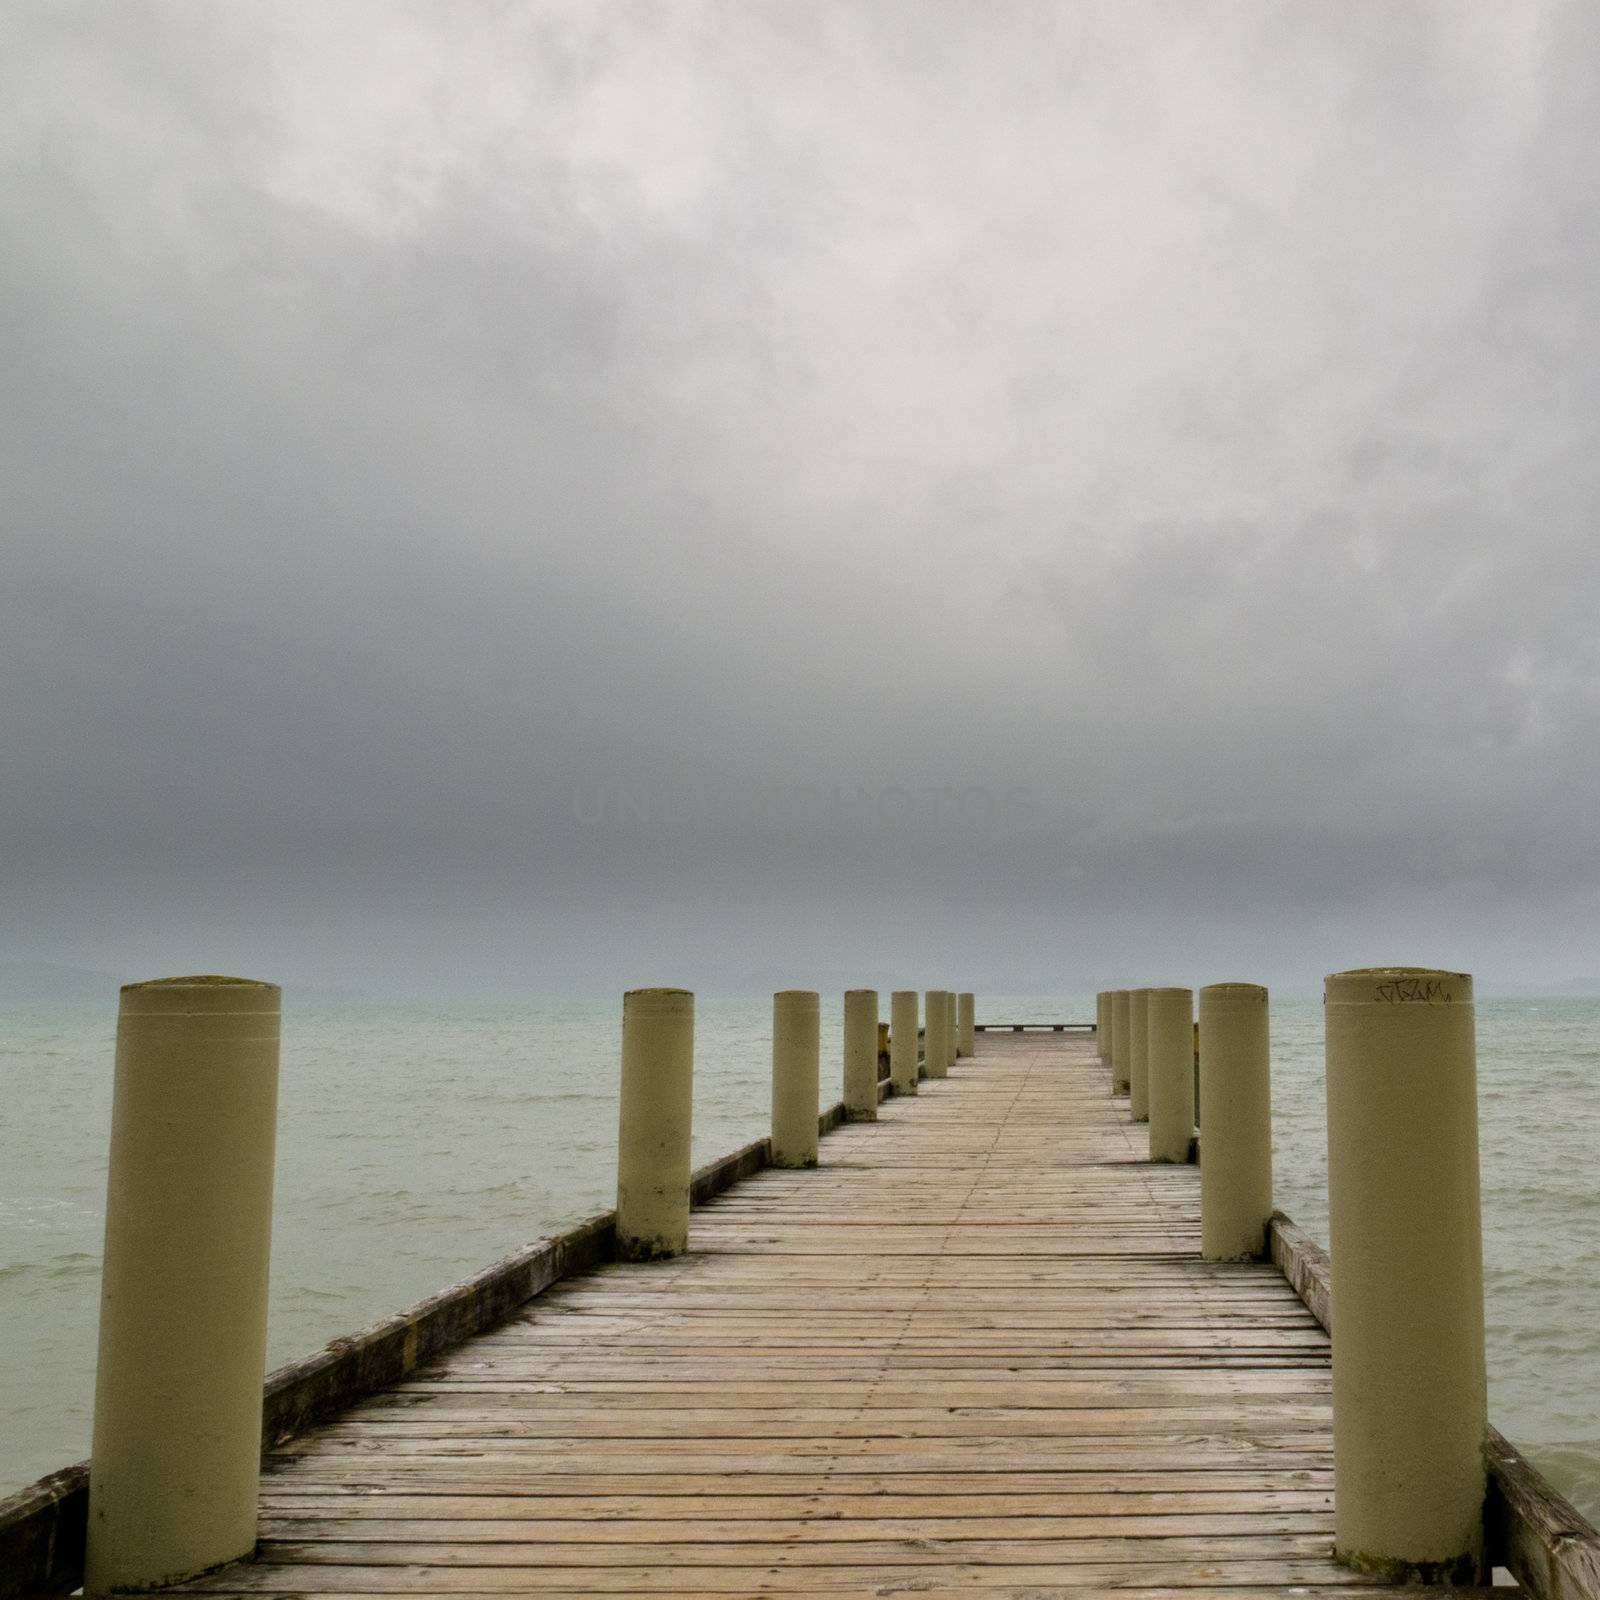 Wooden marine pier on an overcast day by PiLens